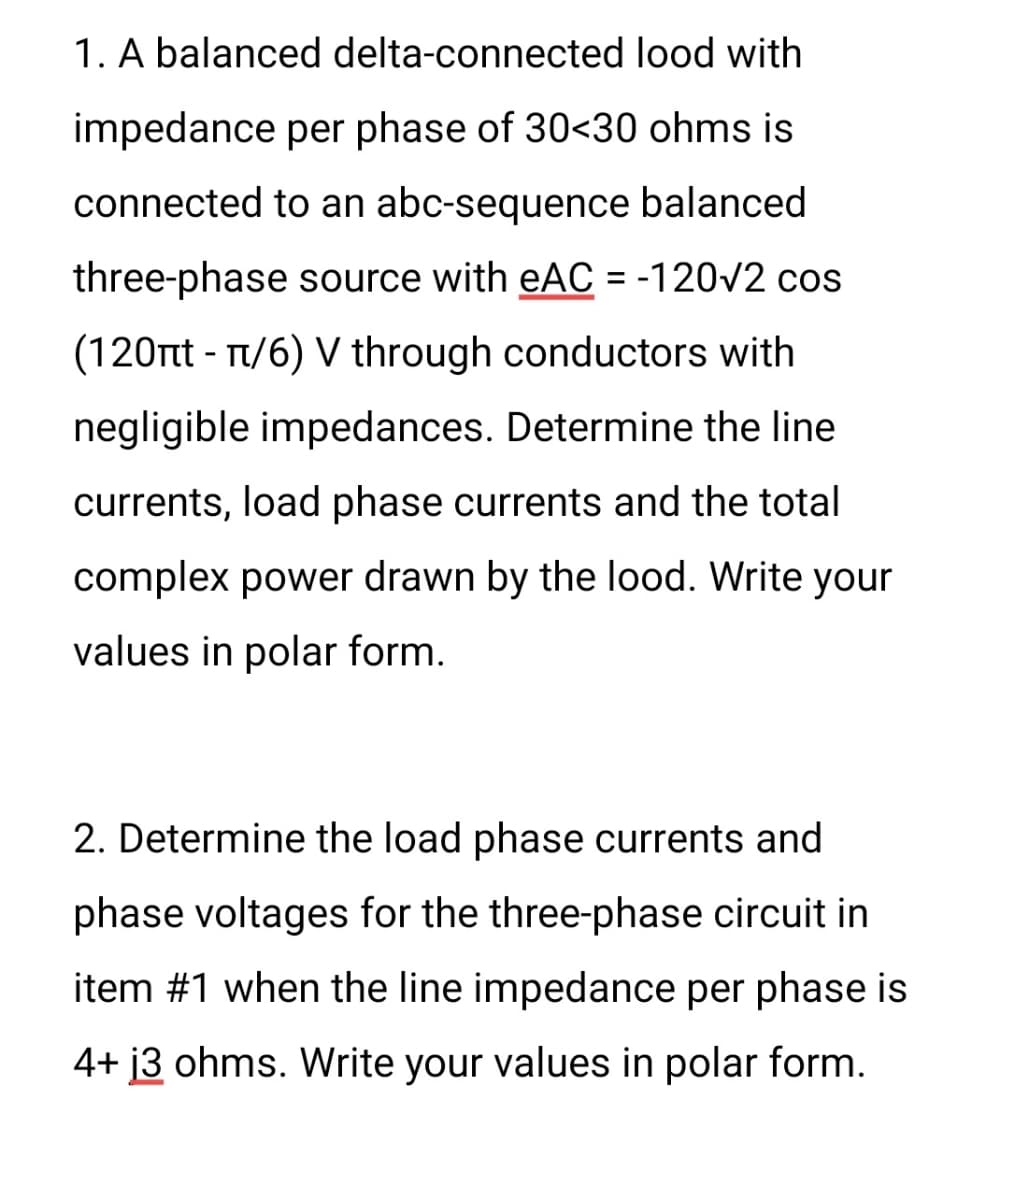 1. A balanced delta-connected lood with
impedance per phase of 30<30 ohms is
connected to an abc-sequence balanced
three-phase source with eAC = -120√2 cos
(120πt - π/6) V through conductors with
negligible impedances. Determine the line
currents, load phase currents and the total
complex power drawn by the lood. Write your
values in polar form.
2. Determine the load phase currents and
phase voltages for the three-phase circuit in
item #1 when the line impedance per phase is
4+ 13 ohms. Write your values in polar form.